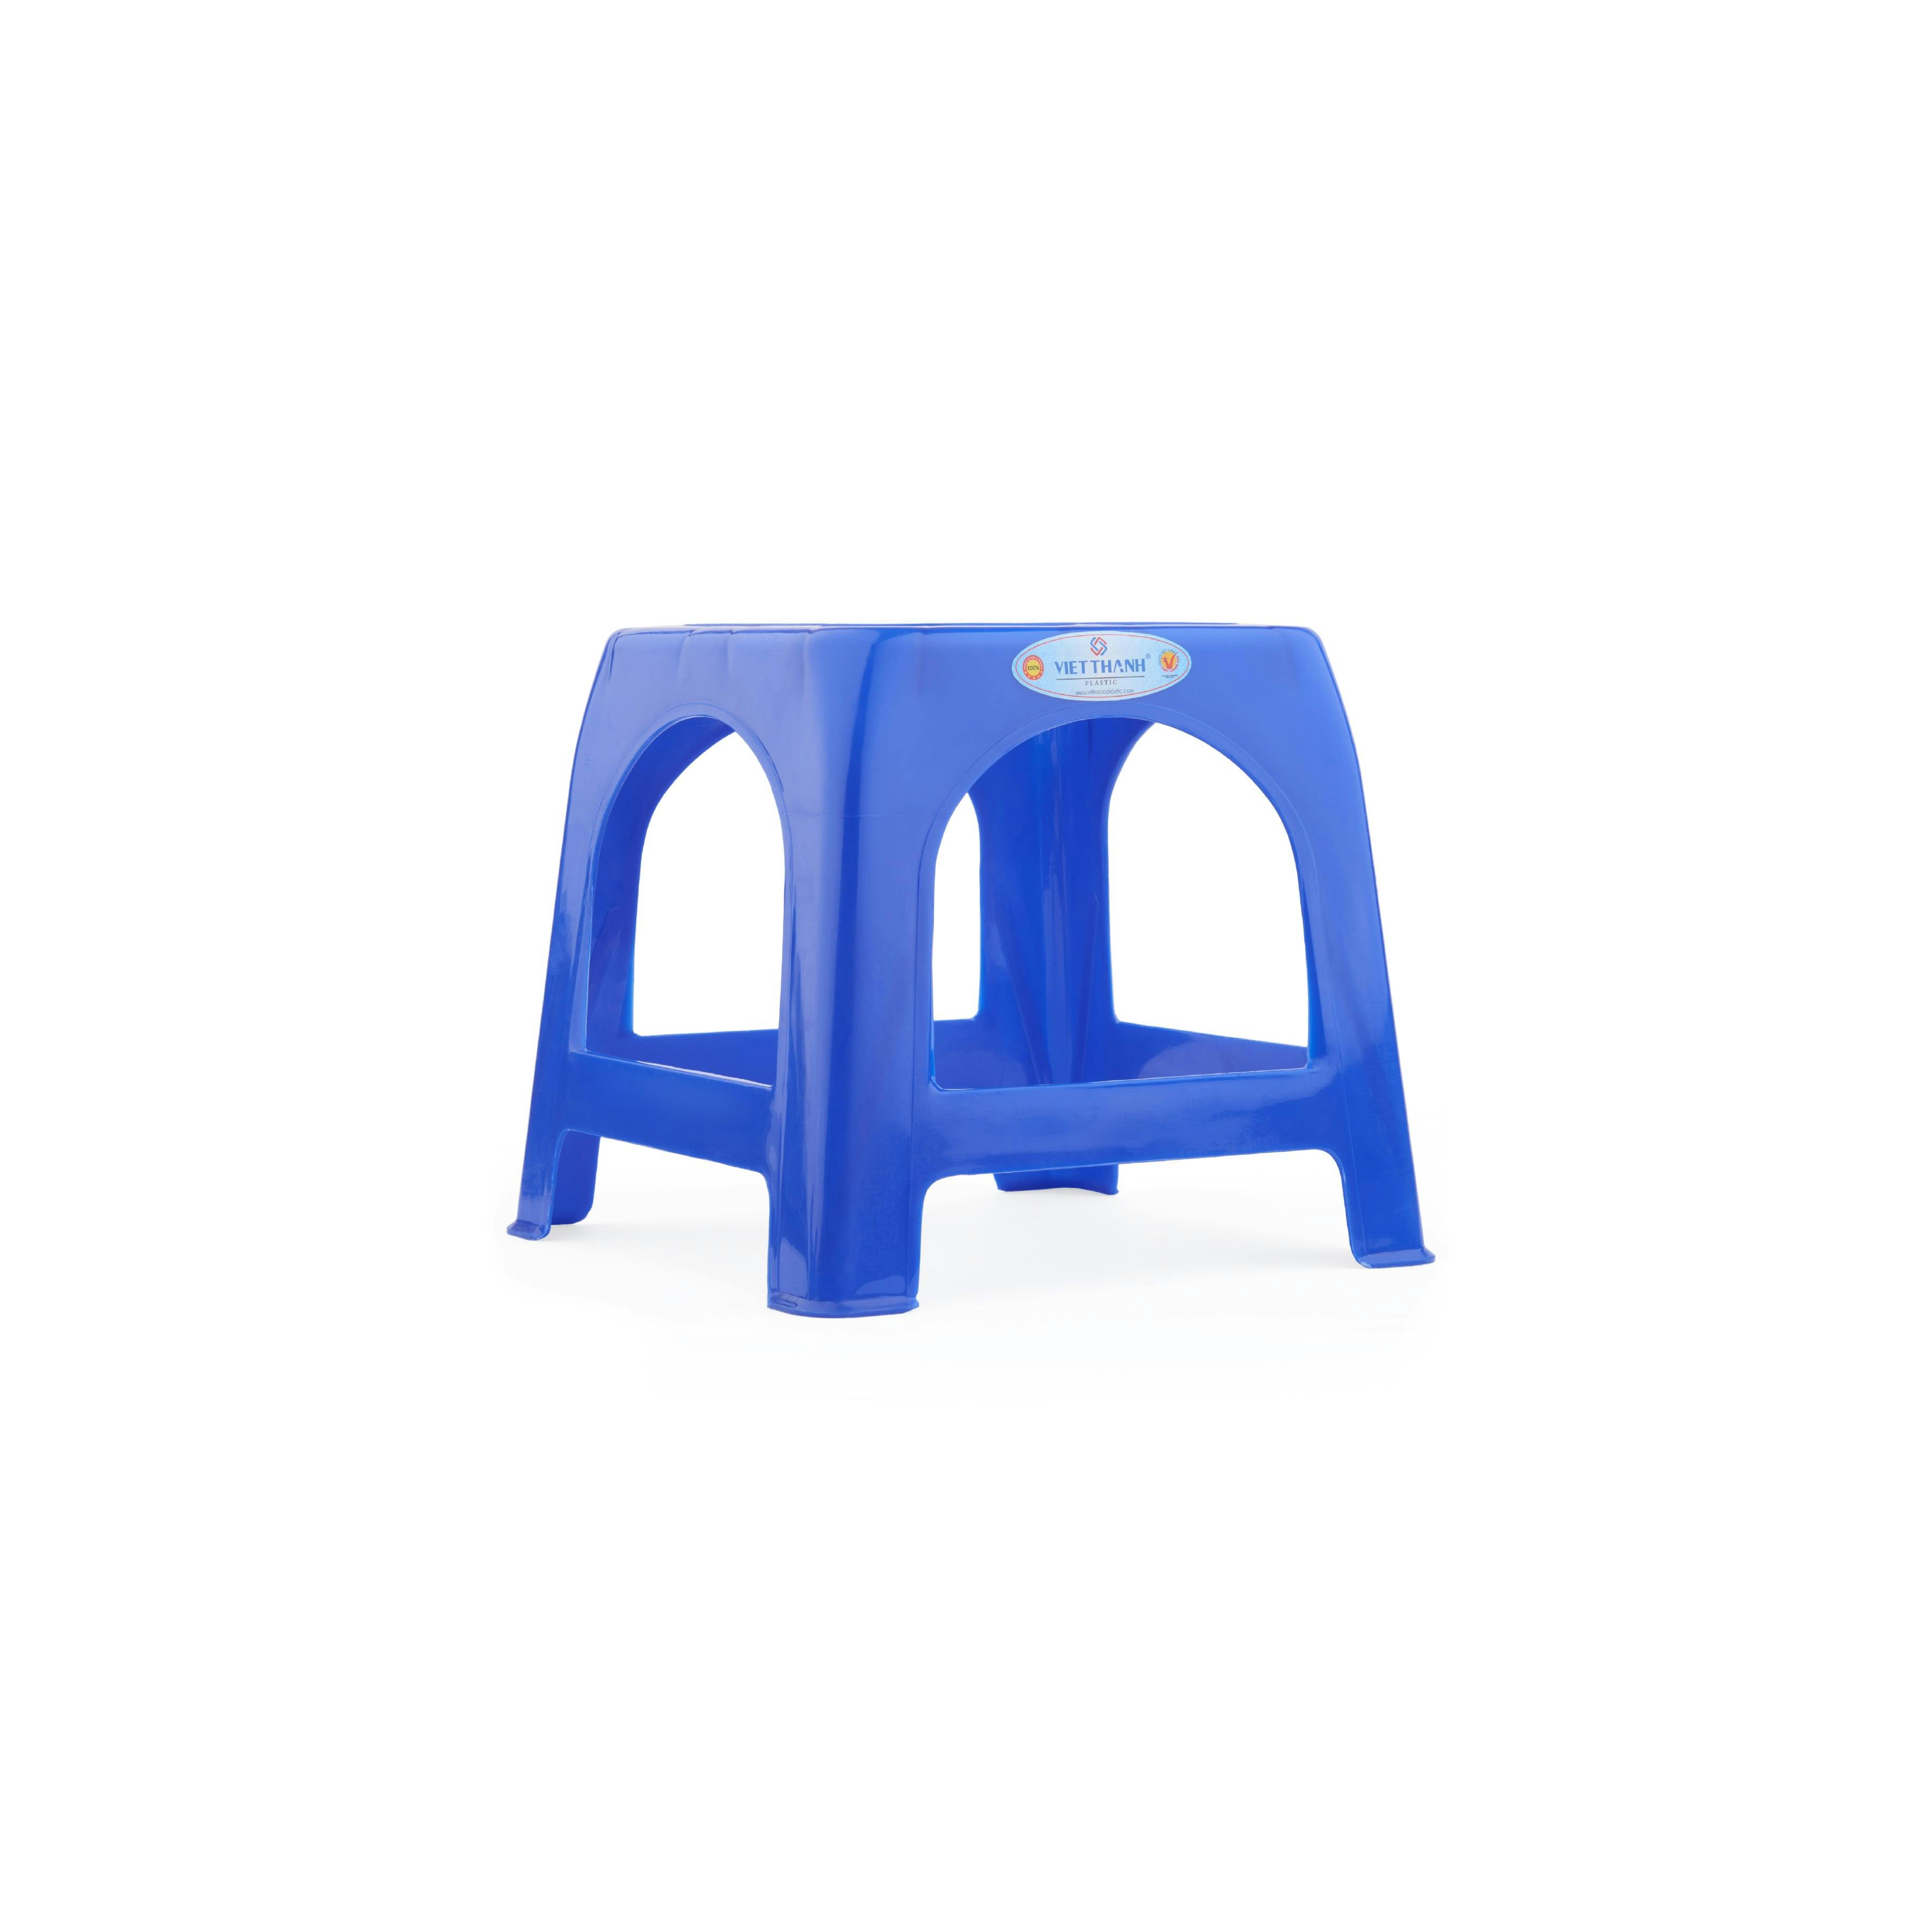 a set of blue stools = 2 of 6